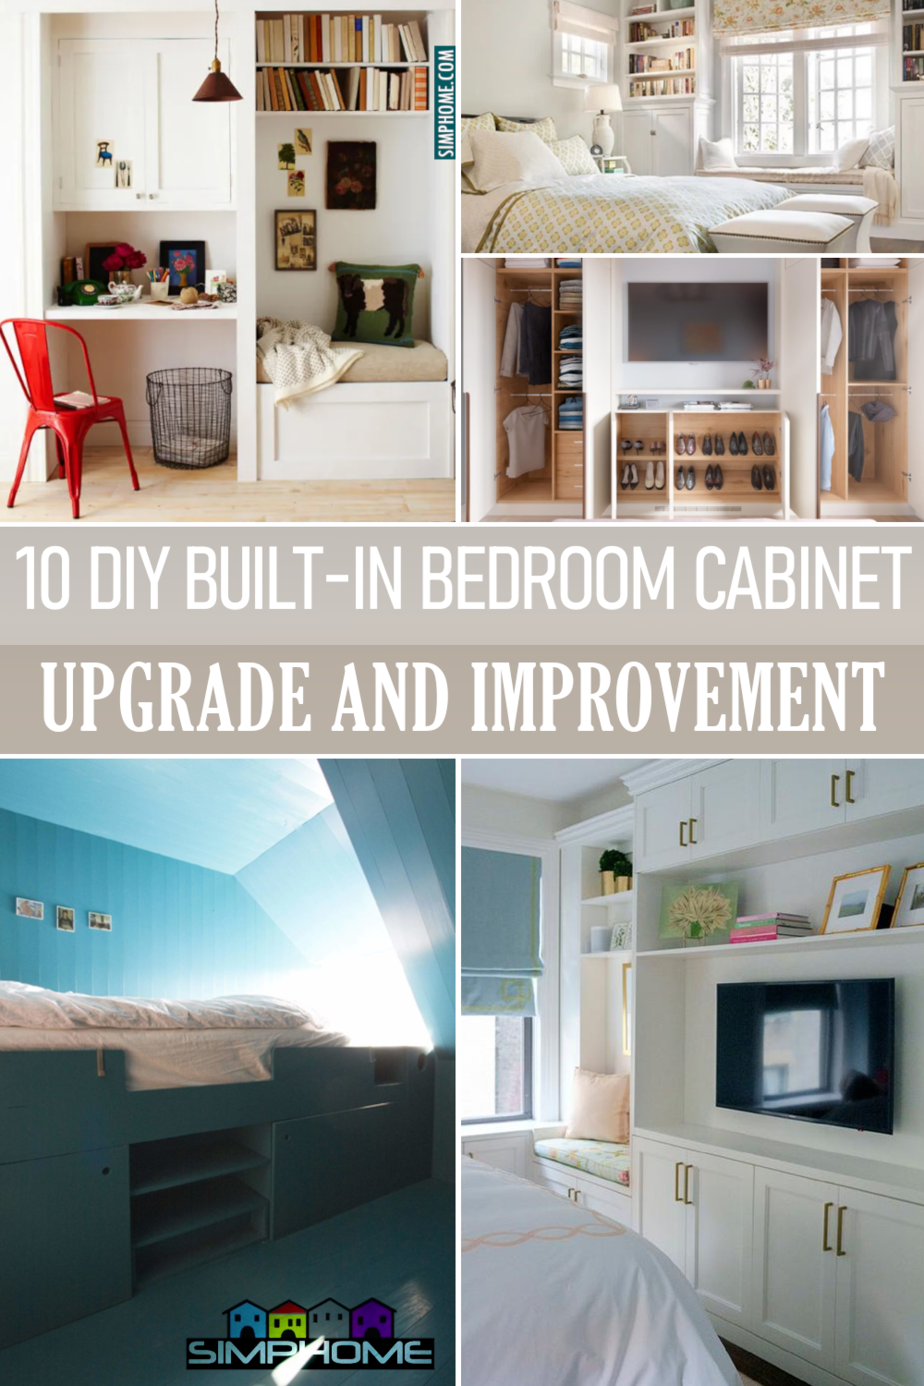 10 Built In Bedroom Cabinets Ideas via Simphome.comFeatured